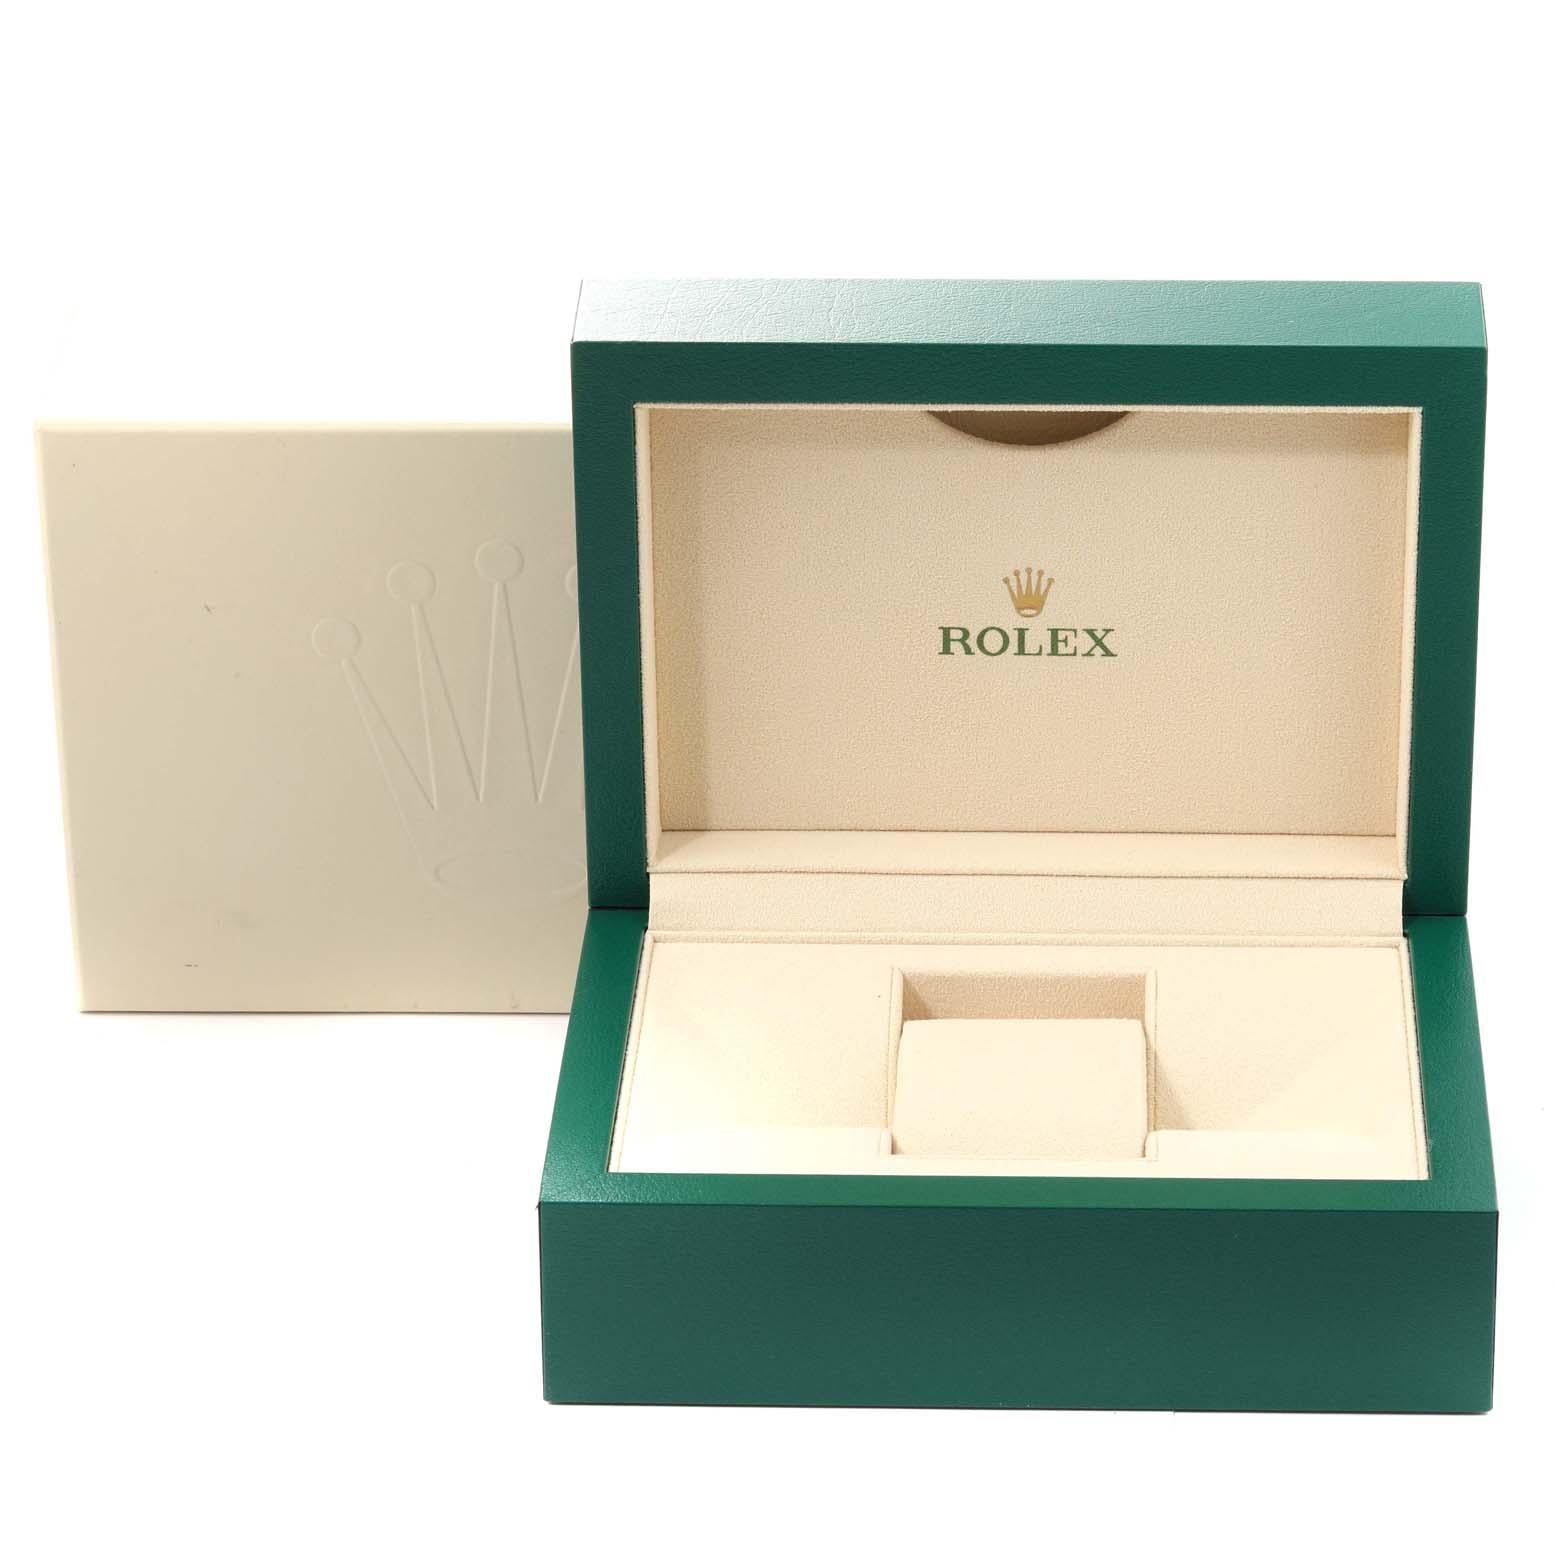 Rolex President Day-Date Yellow Gold Green Dial Mens Watch 118138. Officially certified chronometer self-winding movement. 18k yellow gold oyster case 36.0 mm in diameter. Rolex logo on a crown. 18k yellow gold fluted bezel. Scratch resistant